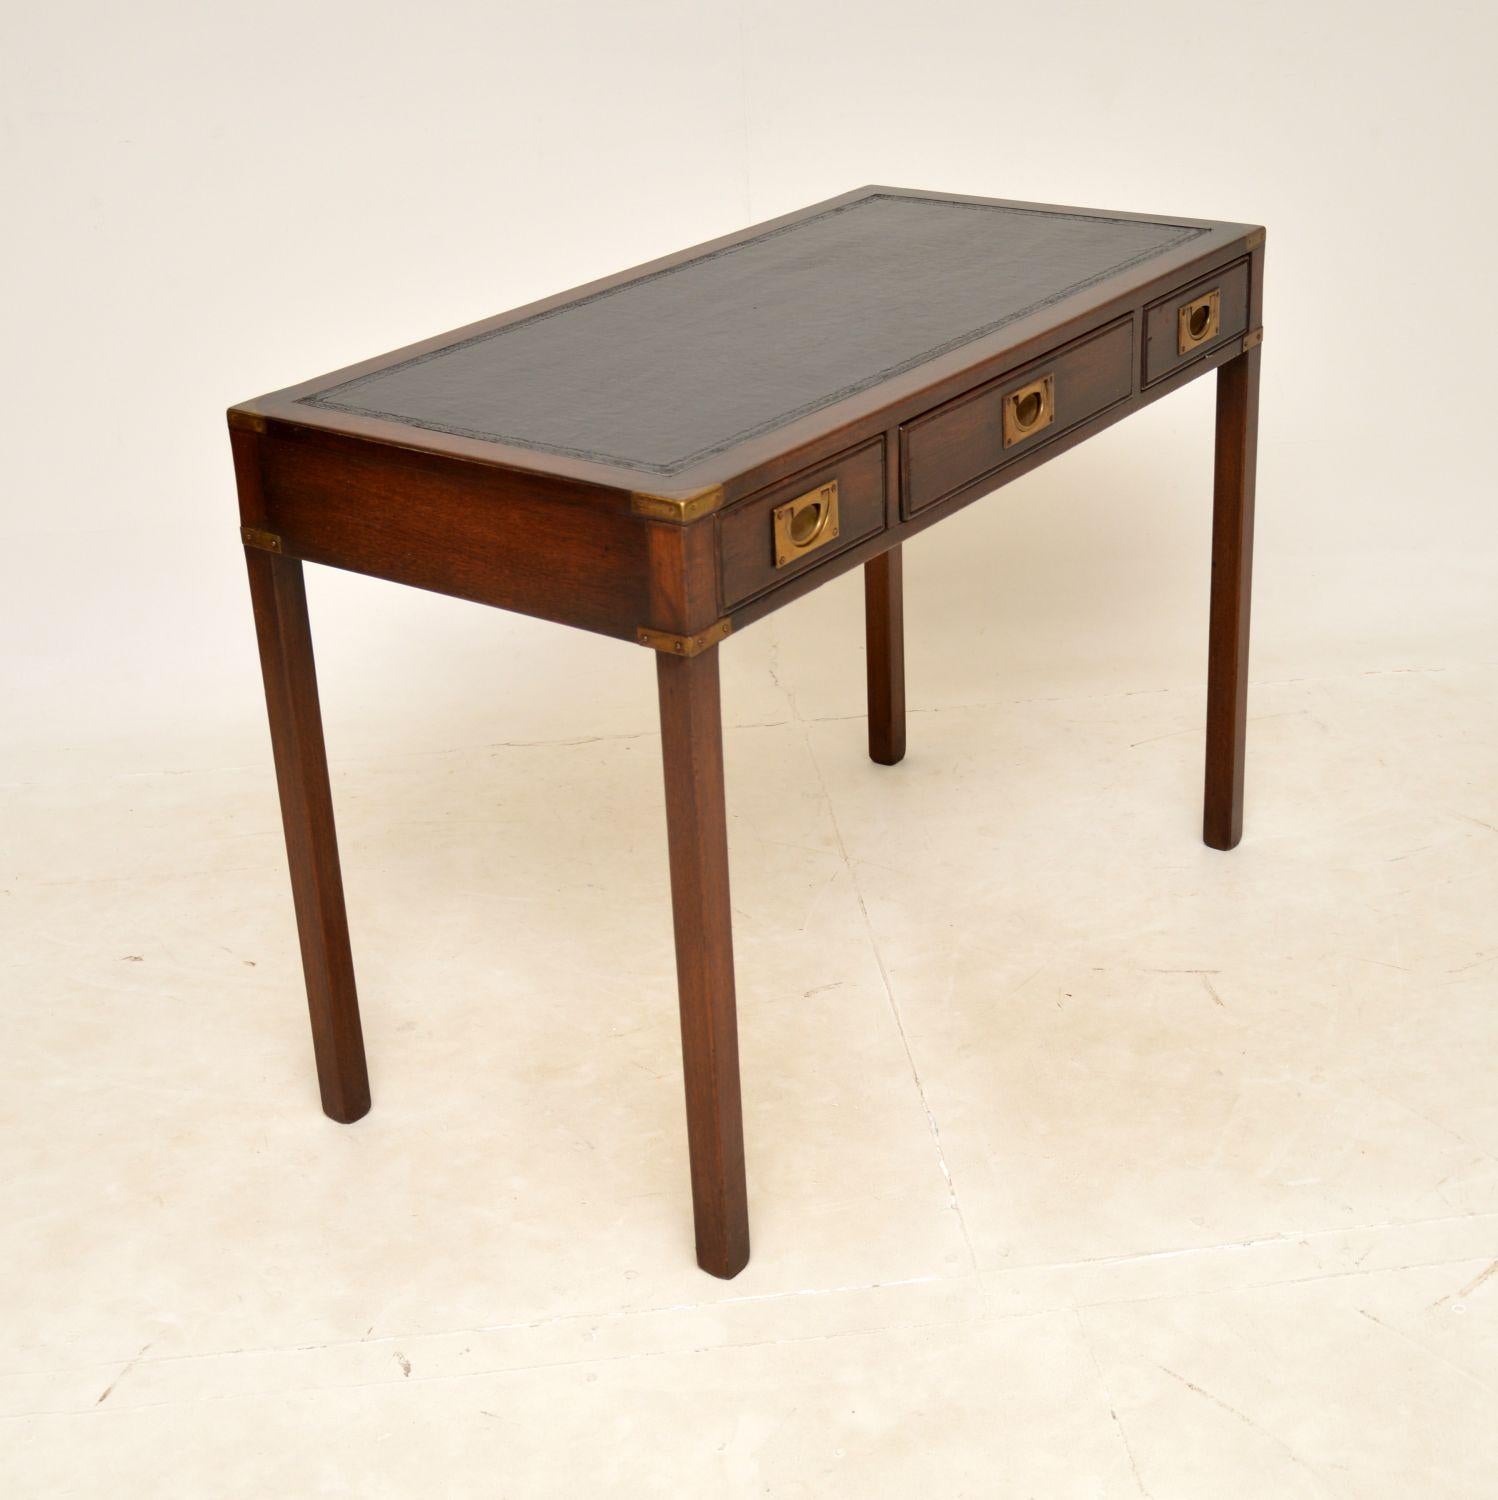 British Antique Military Campaign Desk / Writing Table